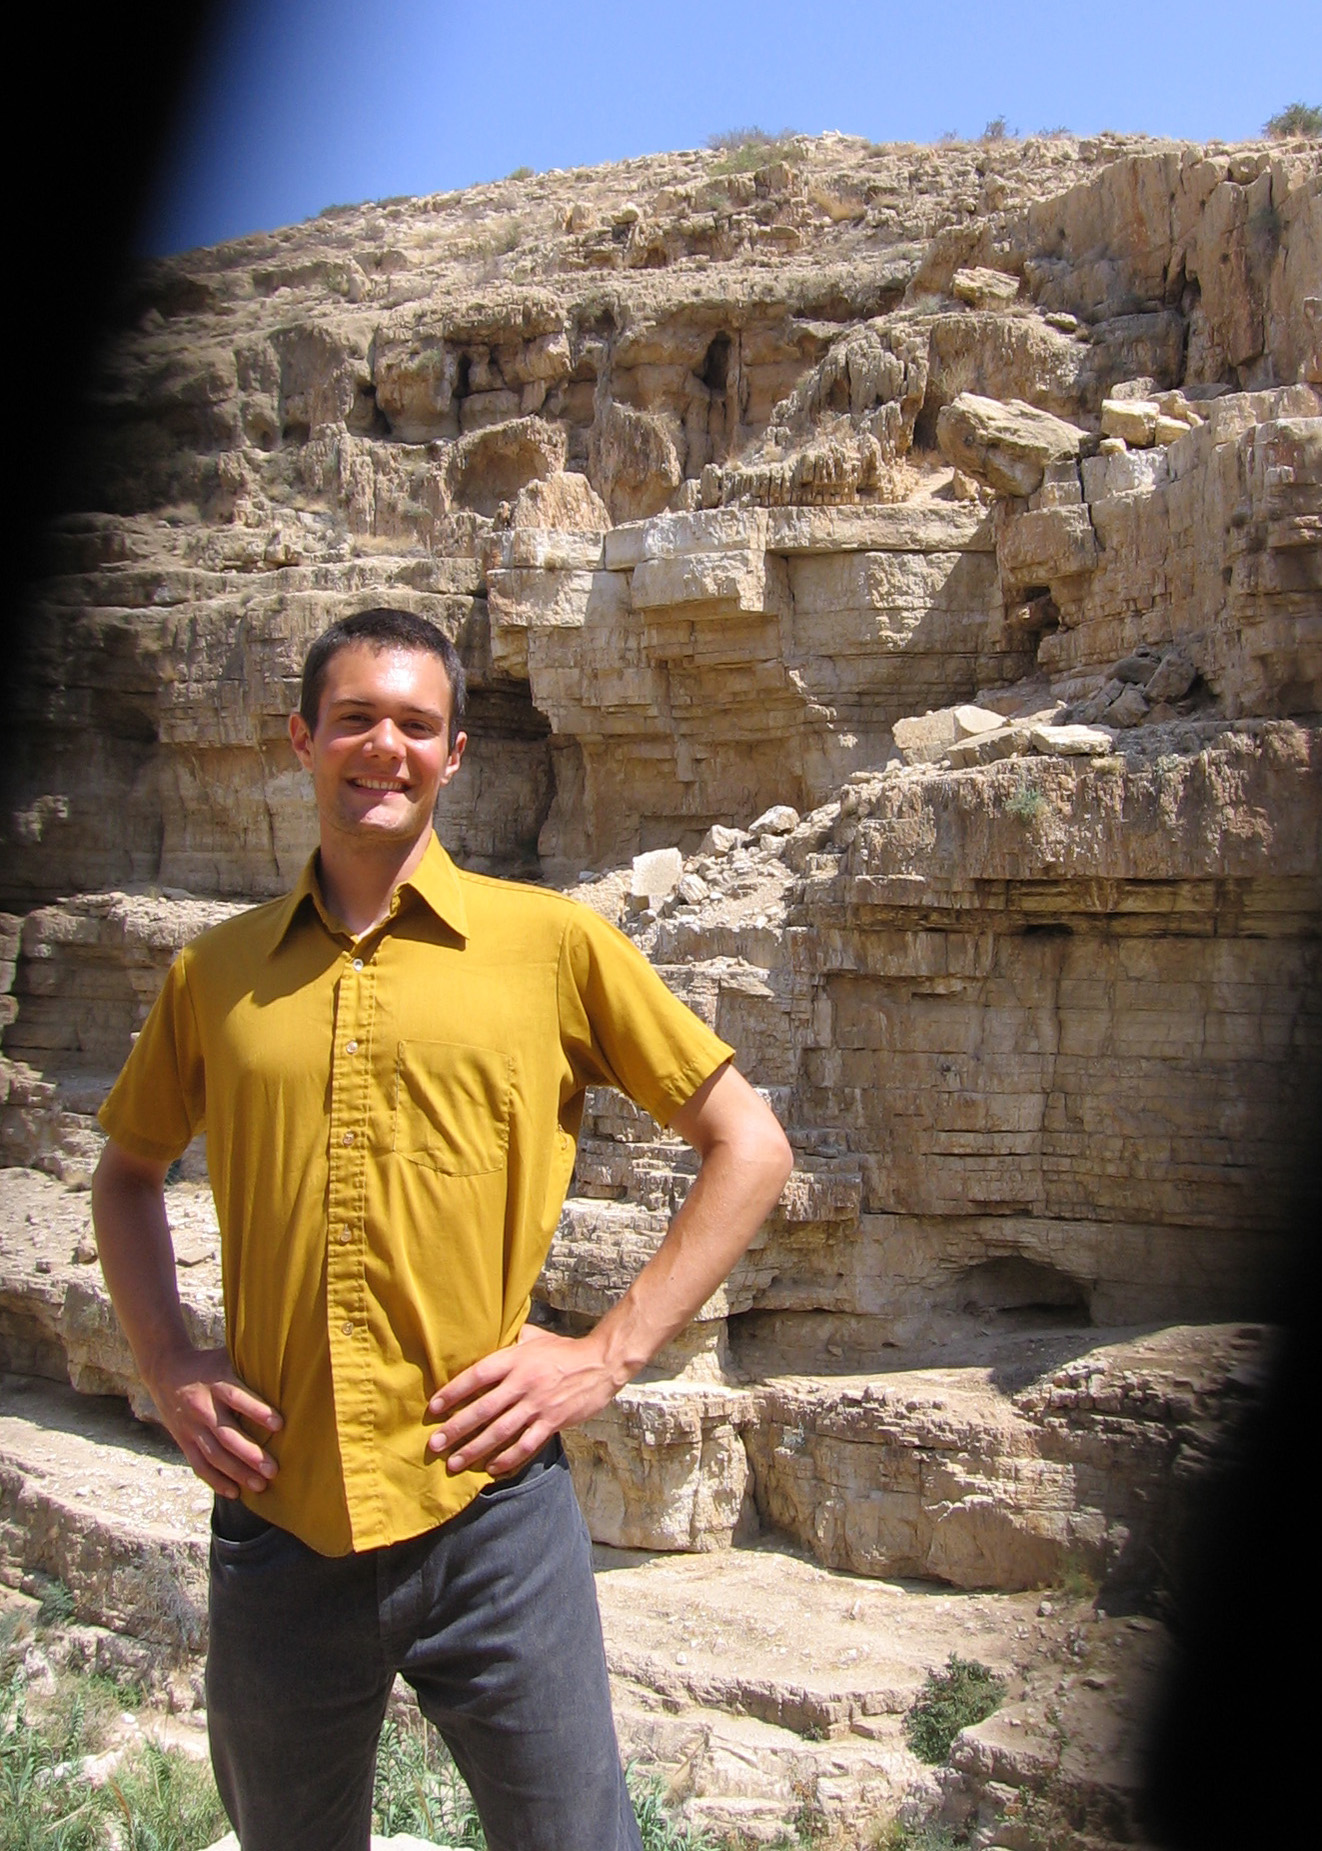 Levi Smucker poses for a picture in front of a Palestinian rockface